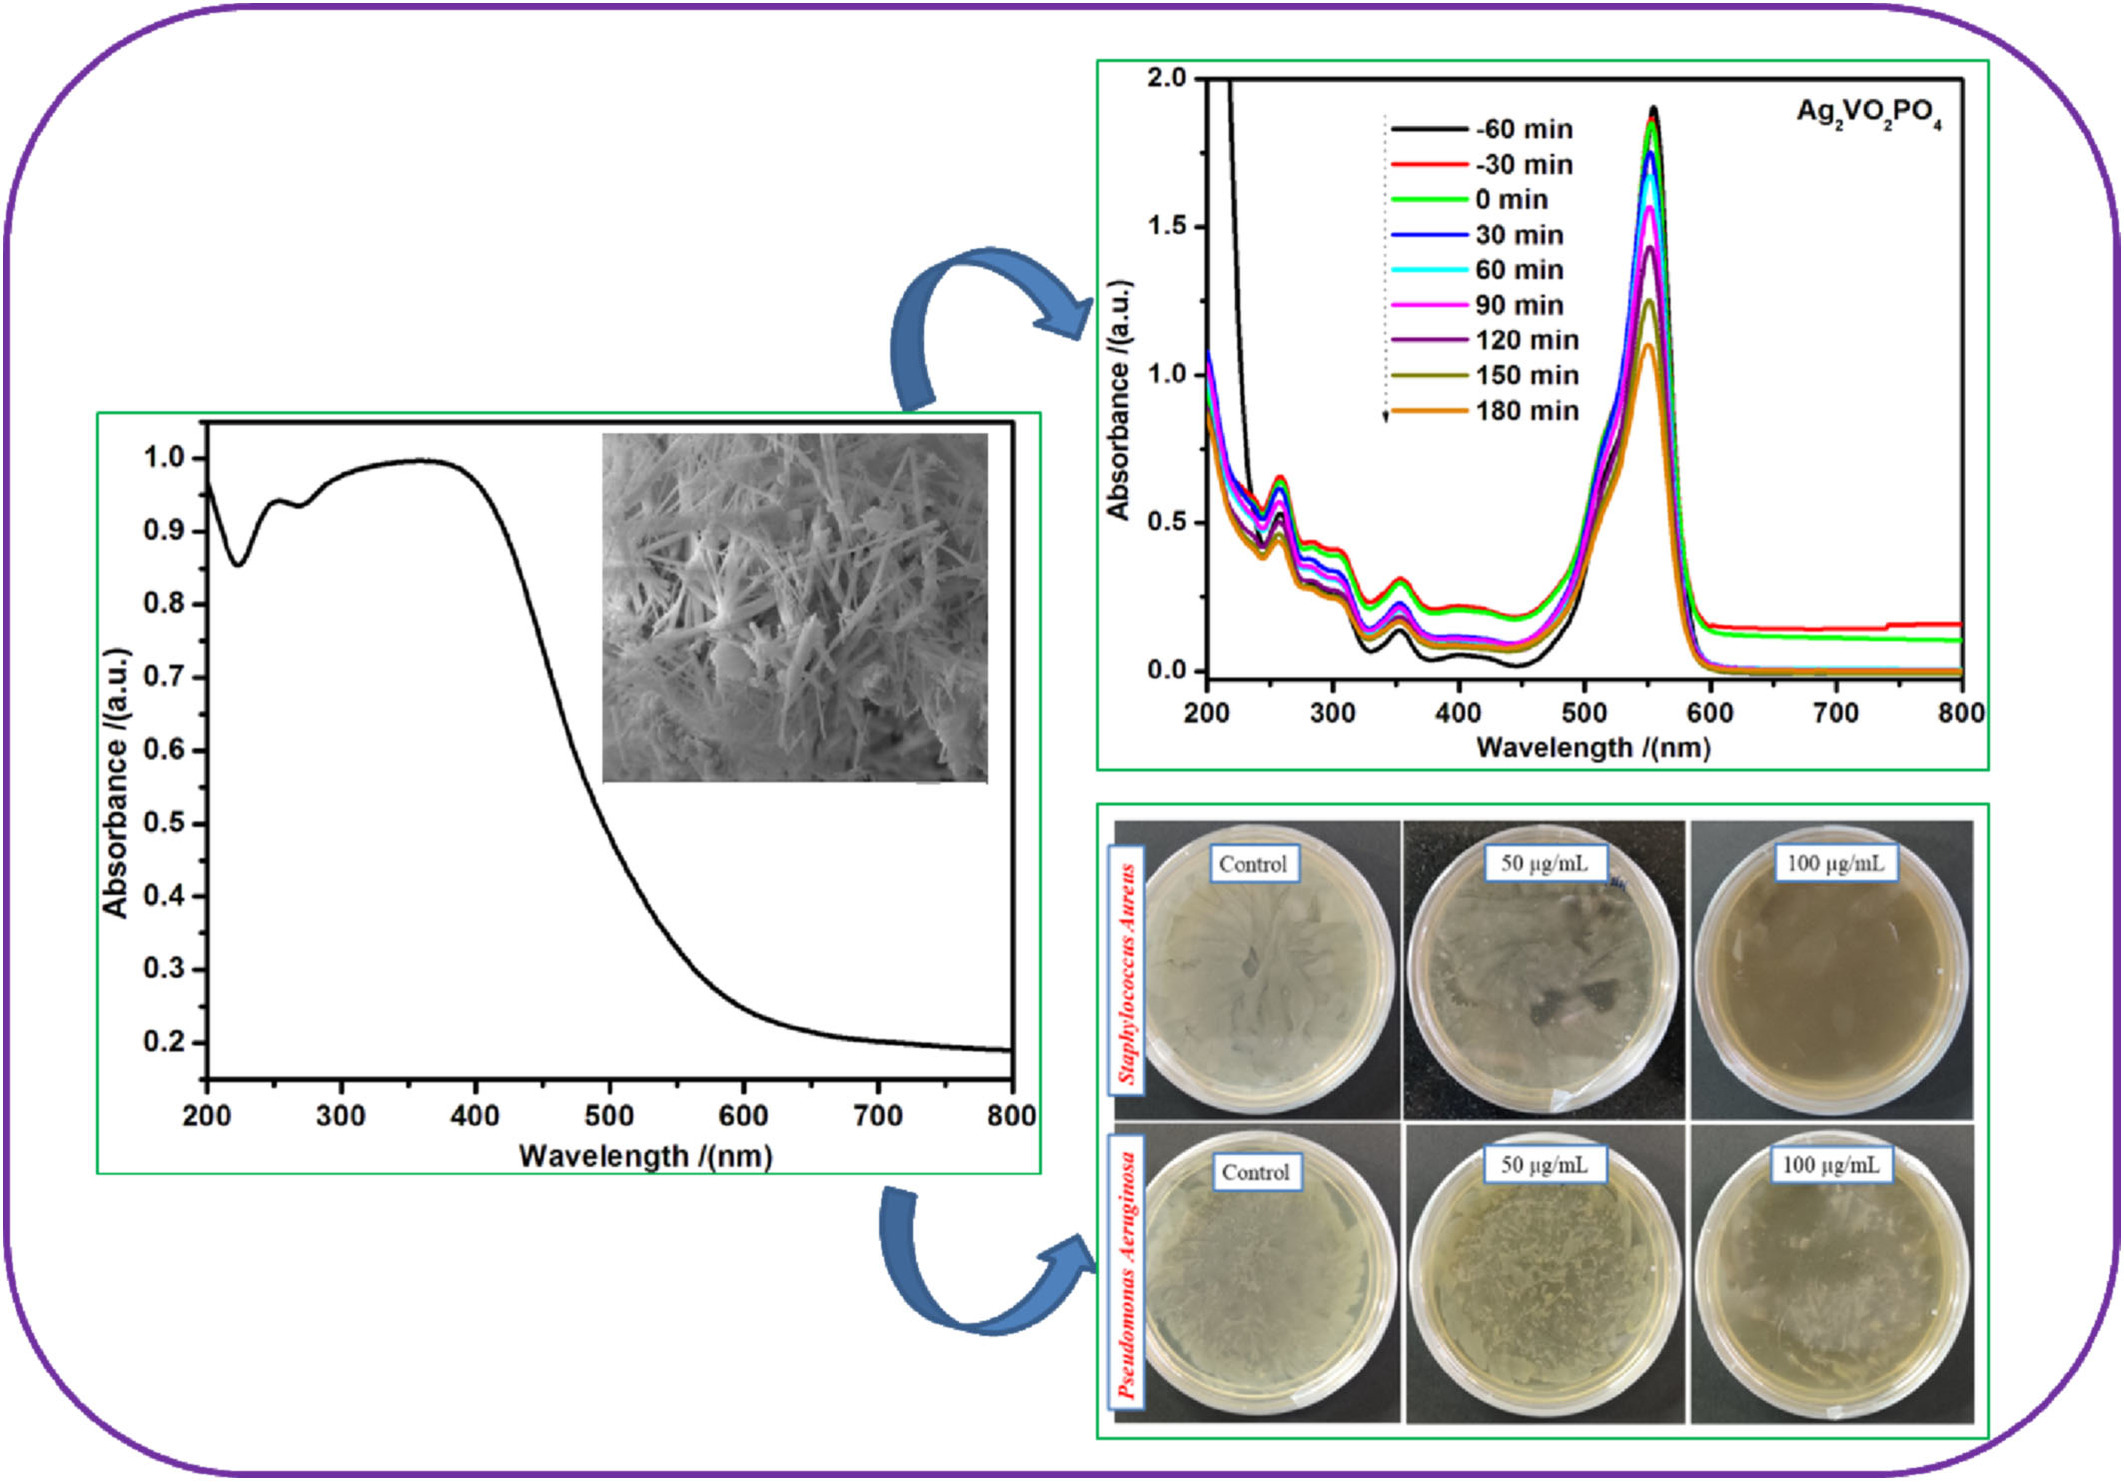 Ag2VO2PO4 Nanorods: Synthesis, Characterization, Photoactivity and Antibacterial activity